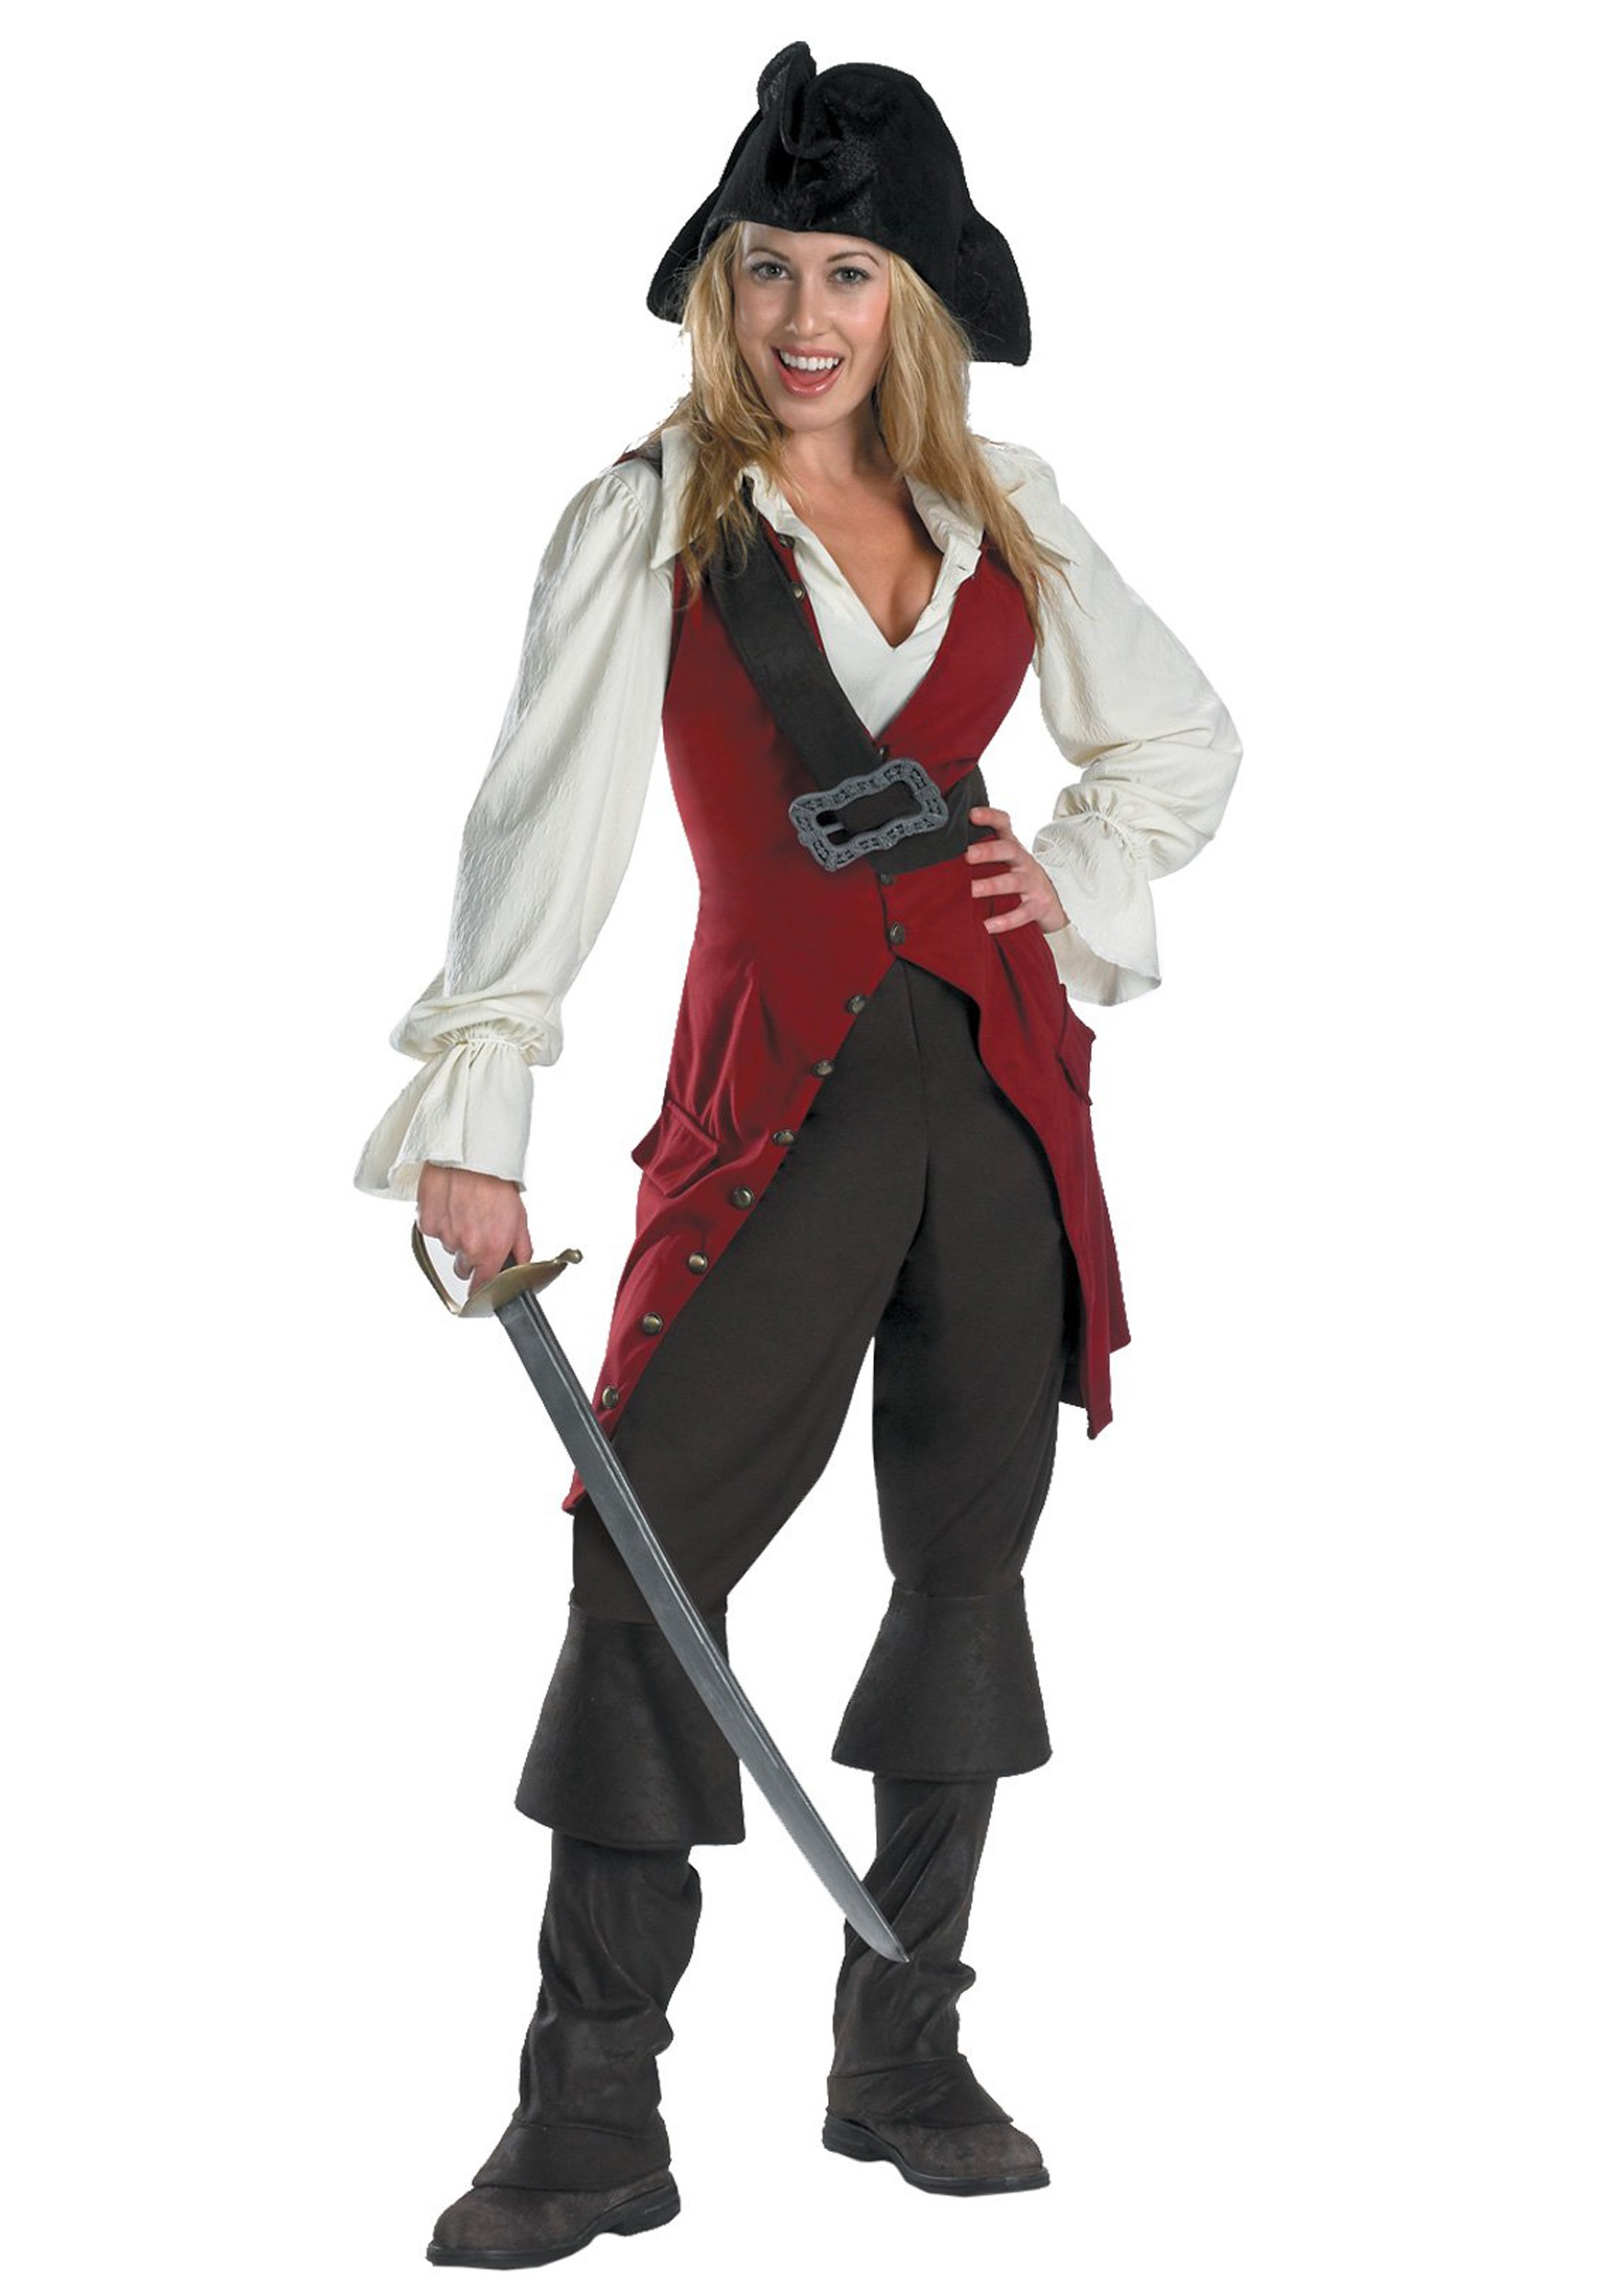 This Elizabeth Swann Teen Pirate Costume will give your teen a look from th...